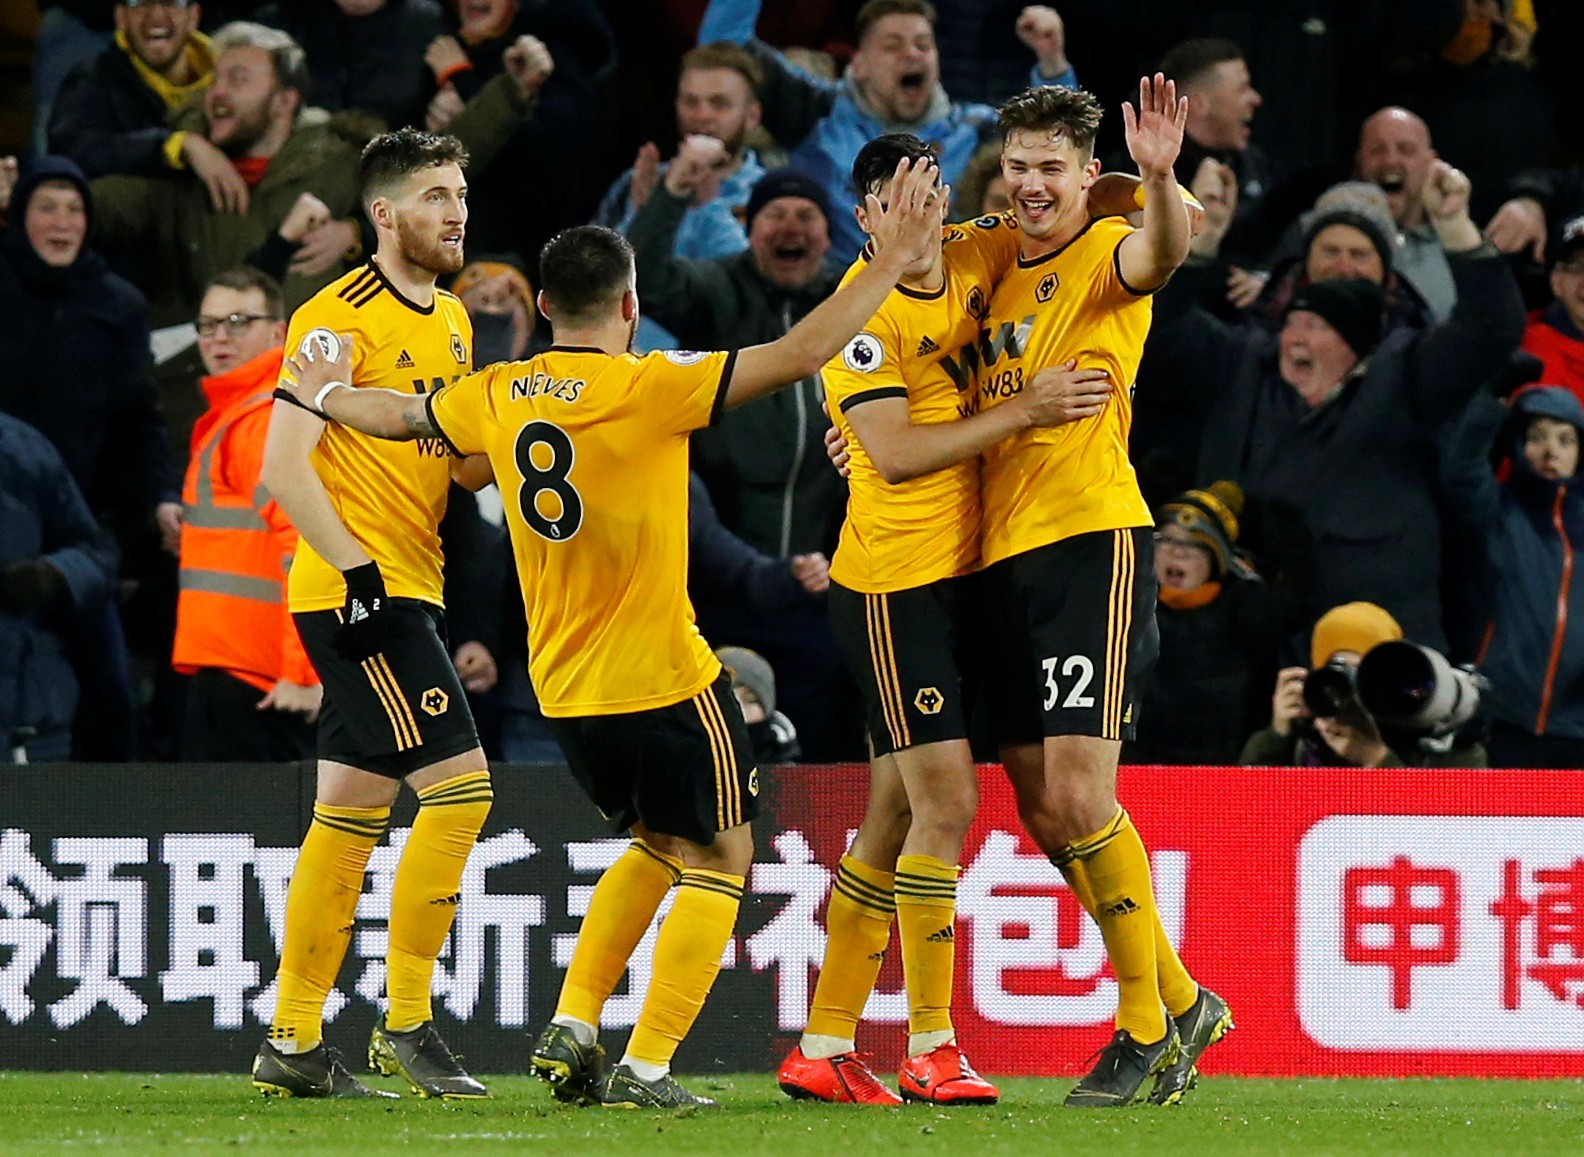 , Football betting tips TODAY: FA Cup third round picks including Man Utd at Wolves, Merseyside derby and Arsenal vs Leeds